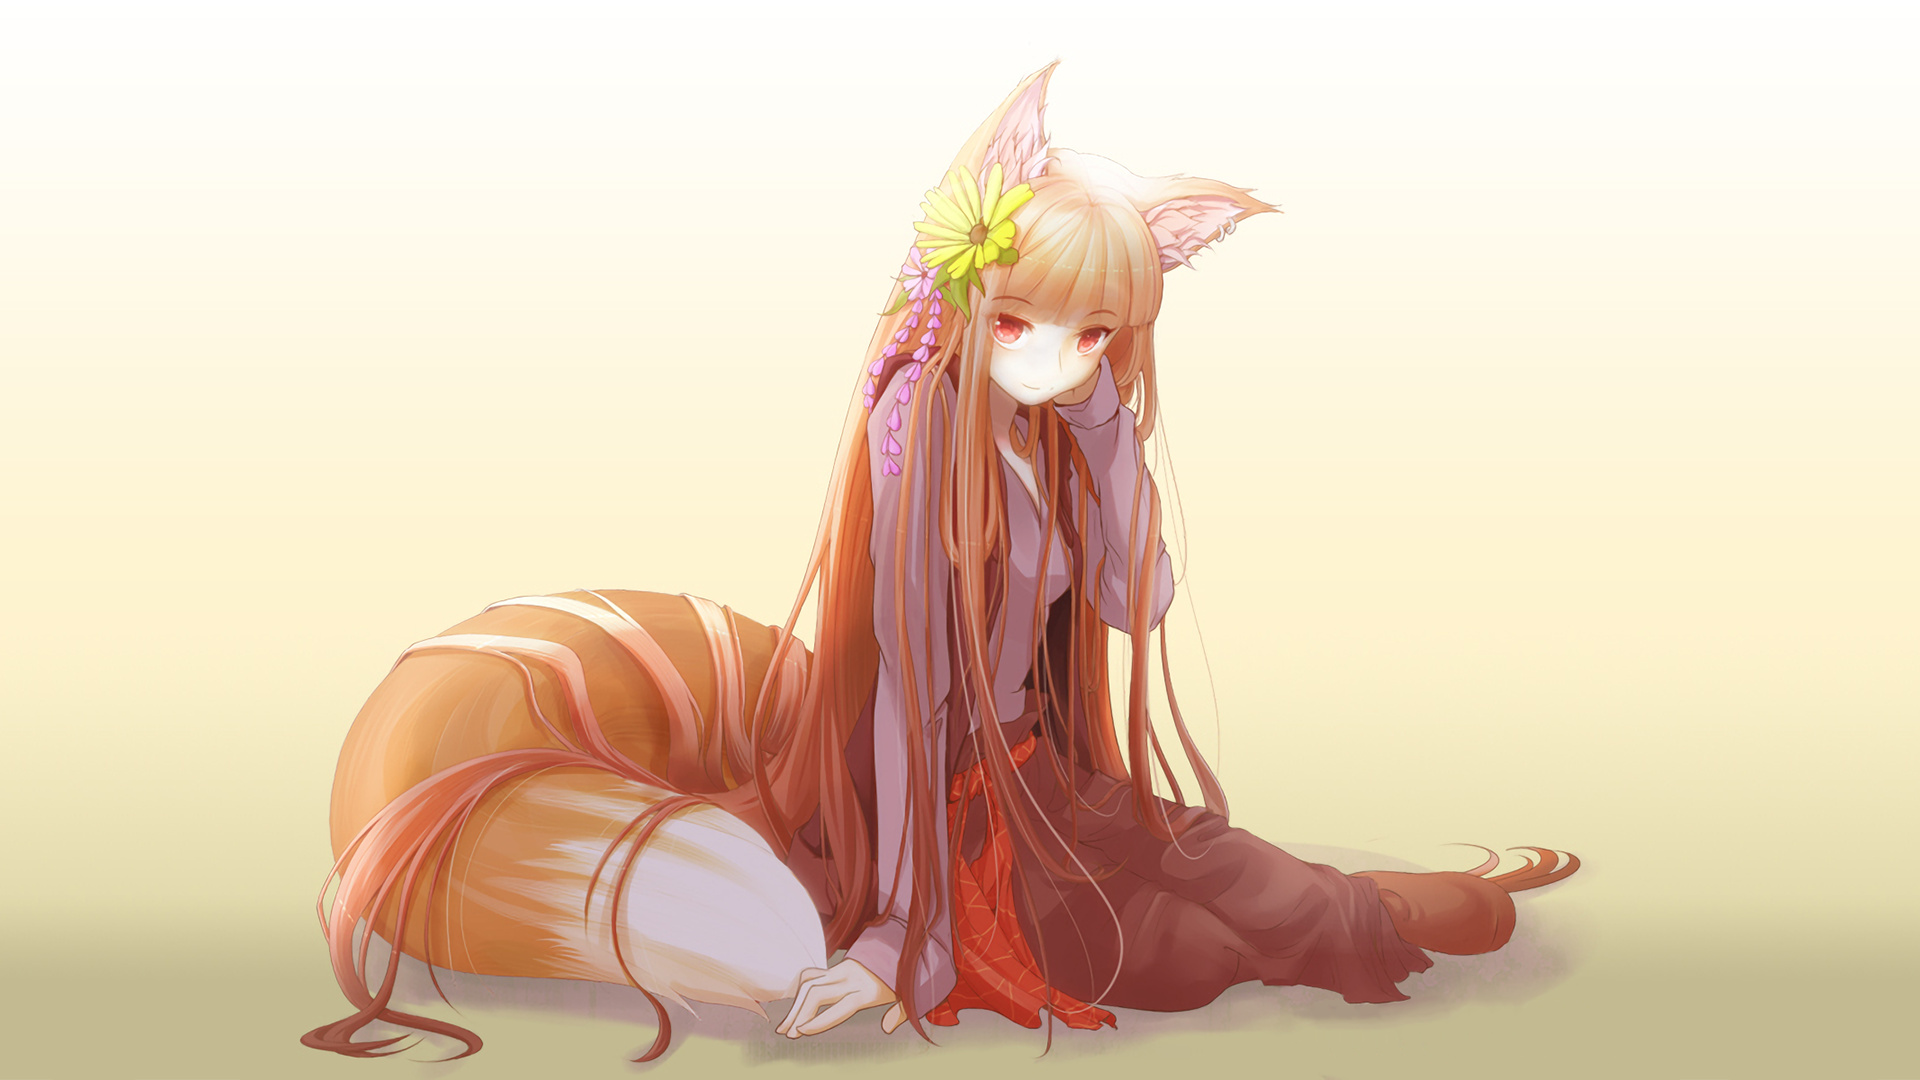 Spice and Wolf (Anime): Adaptation produced by the animation studio Imagin. 1920x1080 Full HD Wallpaper.